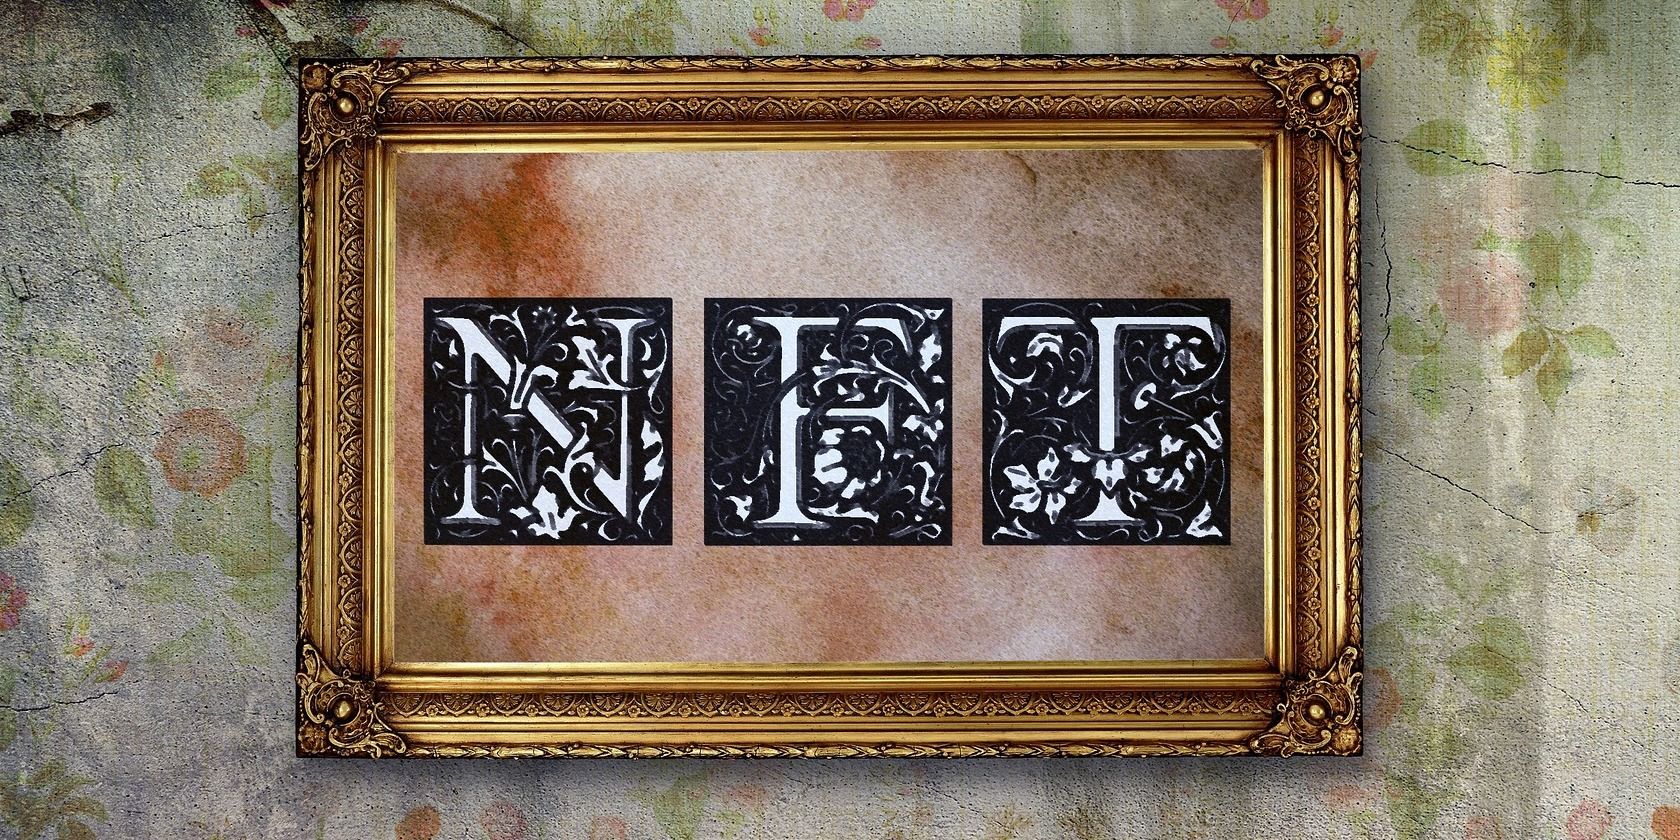 NFT letters in a photo frame